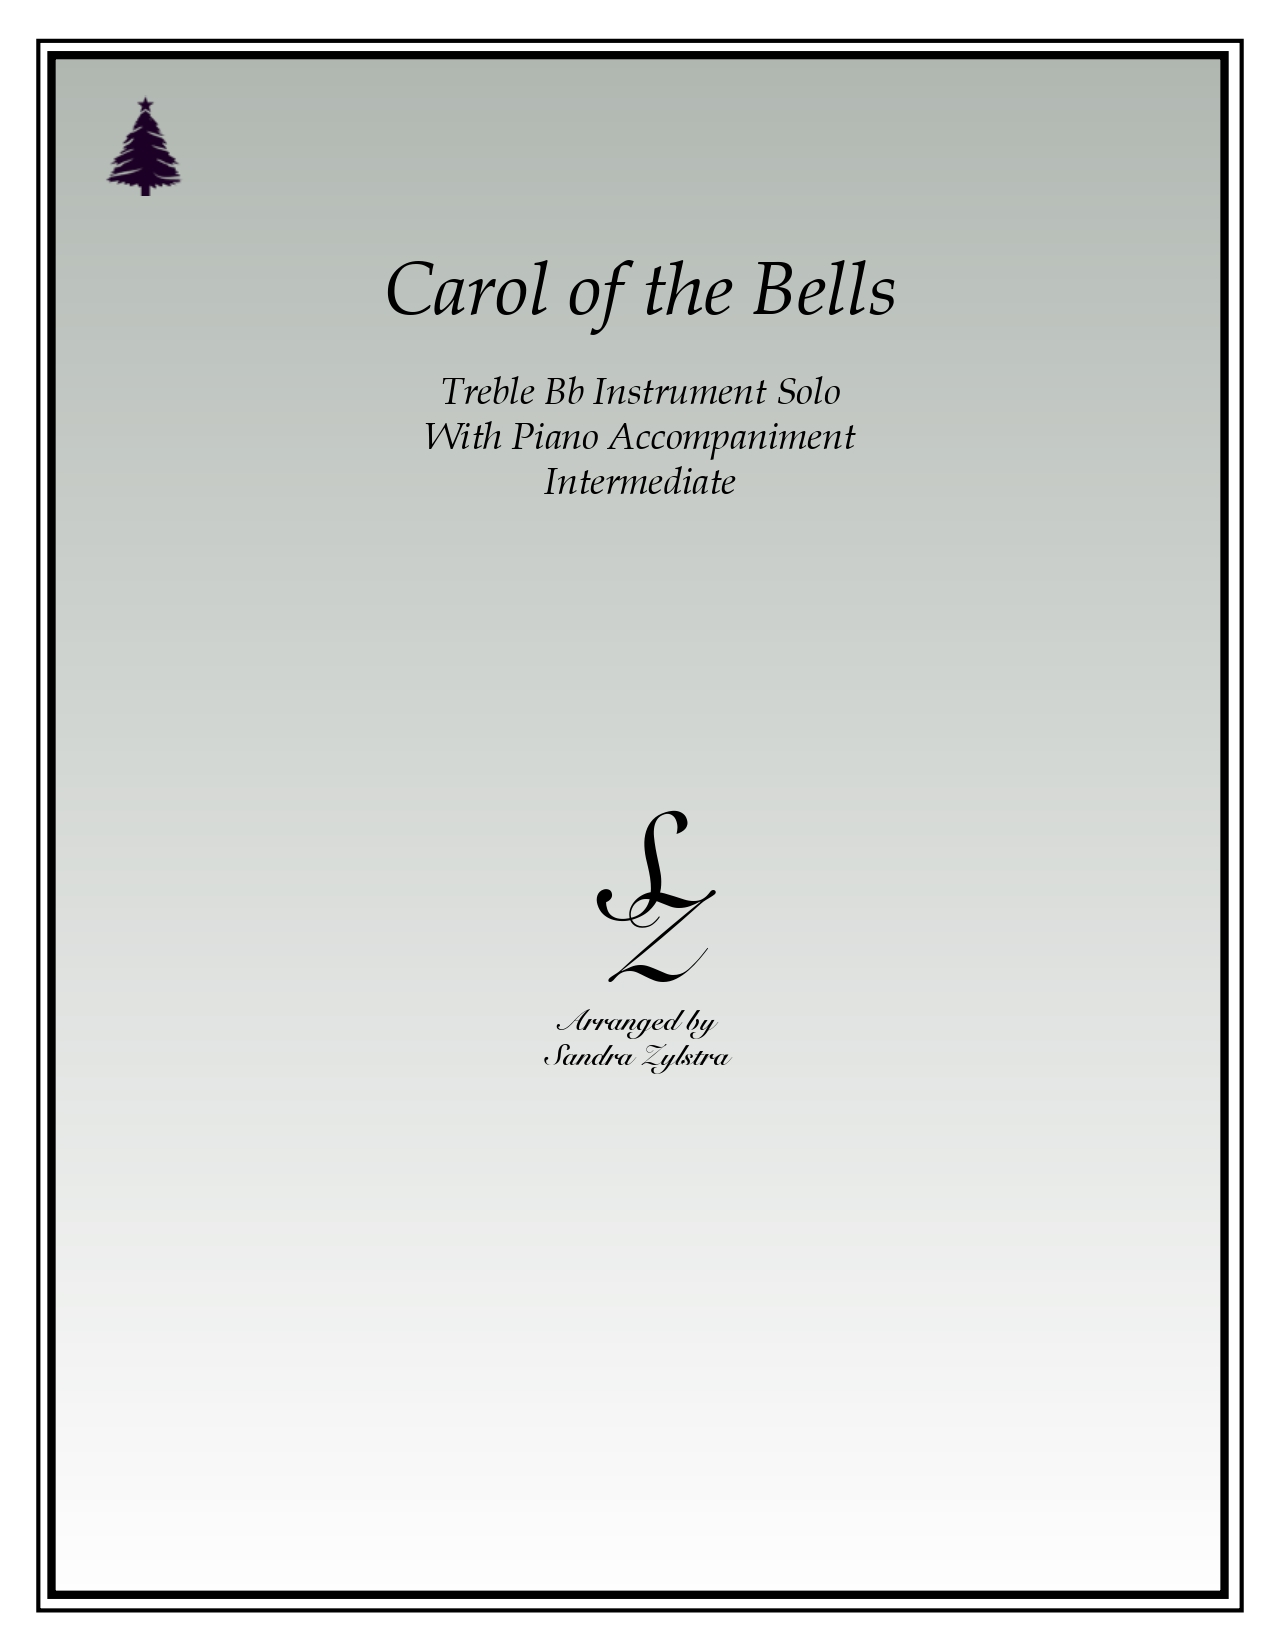 Carol Of The Bells Bb instrument solo part cover page 00011